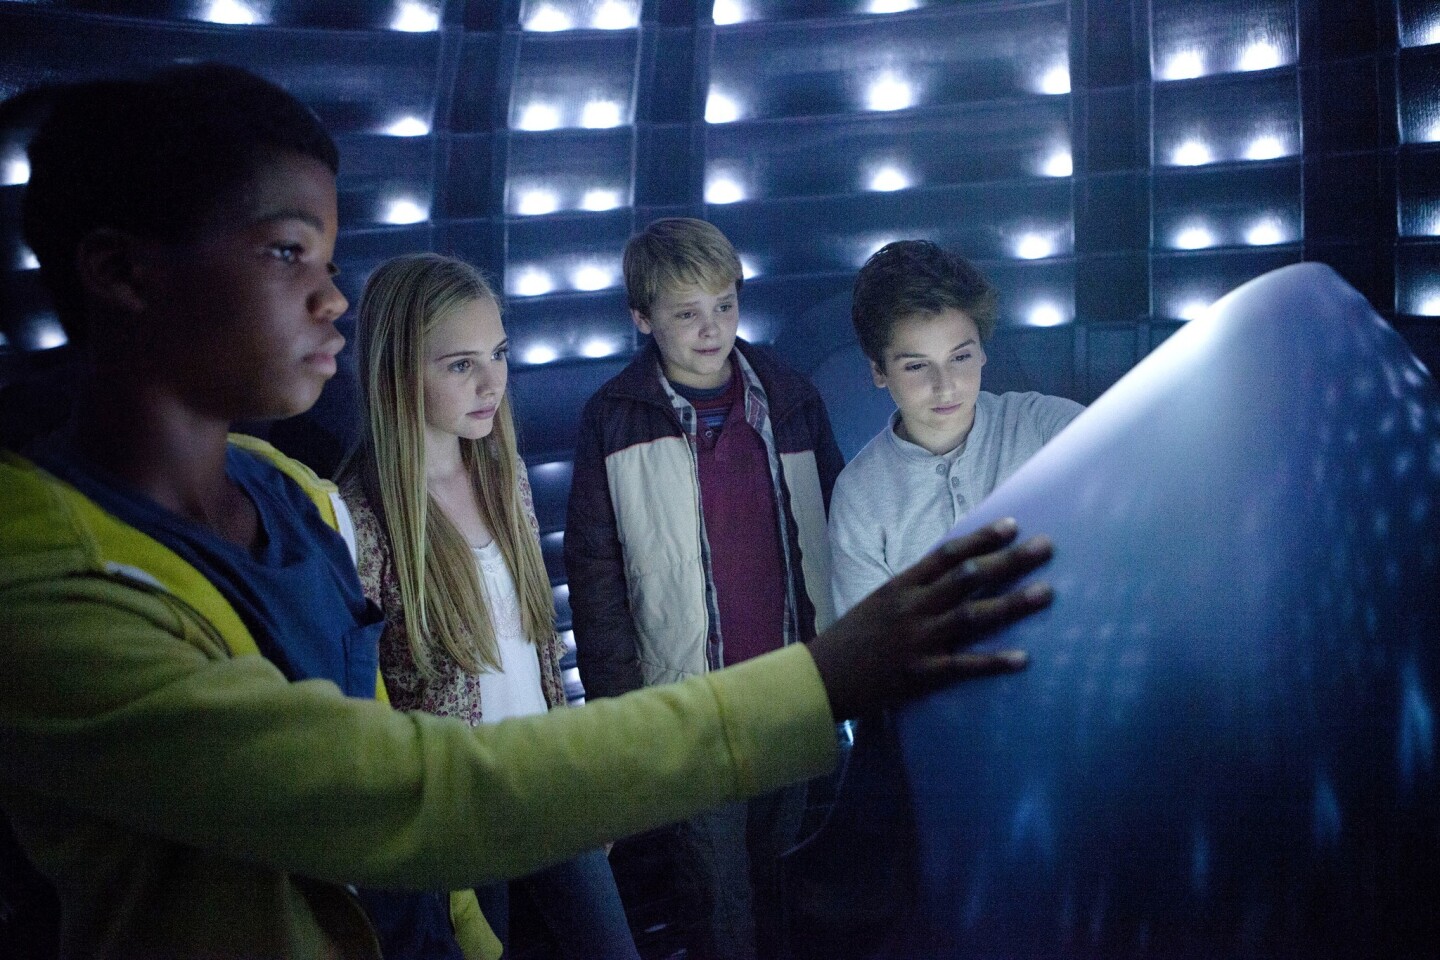 Three boys start to receive strange coded messages on their cellphones, and their investigation brings them into contact with an extraterrestrial. With Teo Halm, Brian "Astro" Bradley and Reese Hartwig. Written by Henry Gayden. Directed by Dave Green. Relativity Media